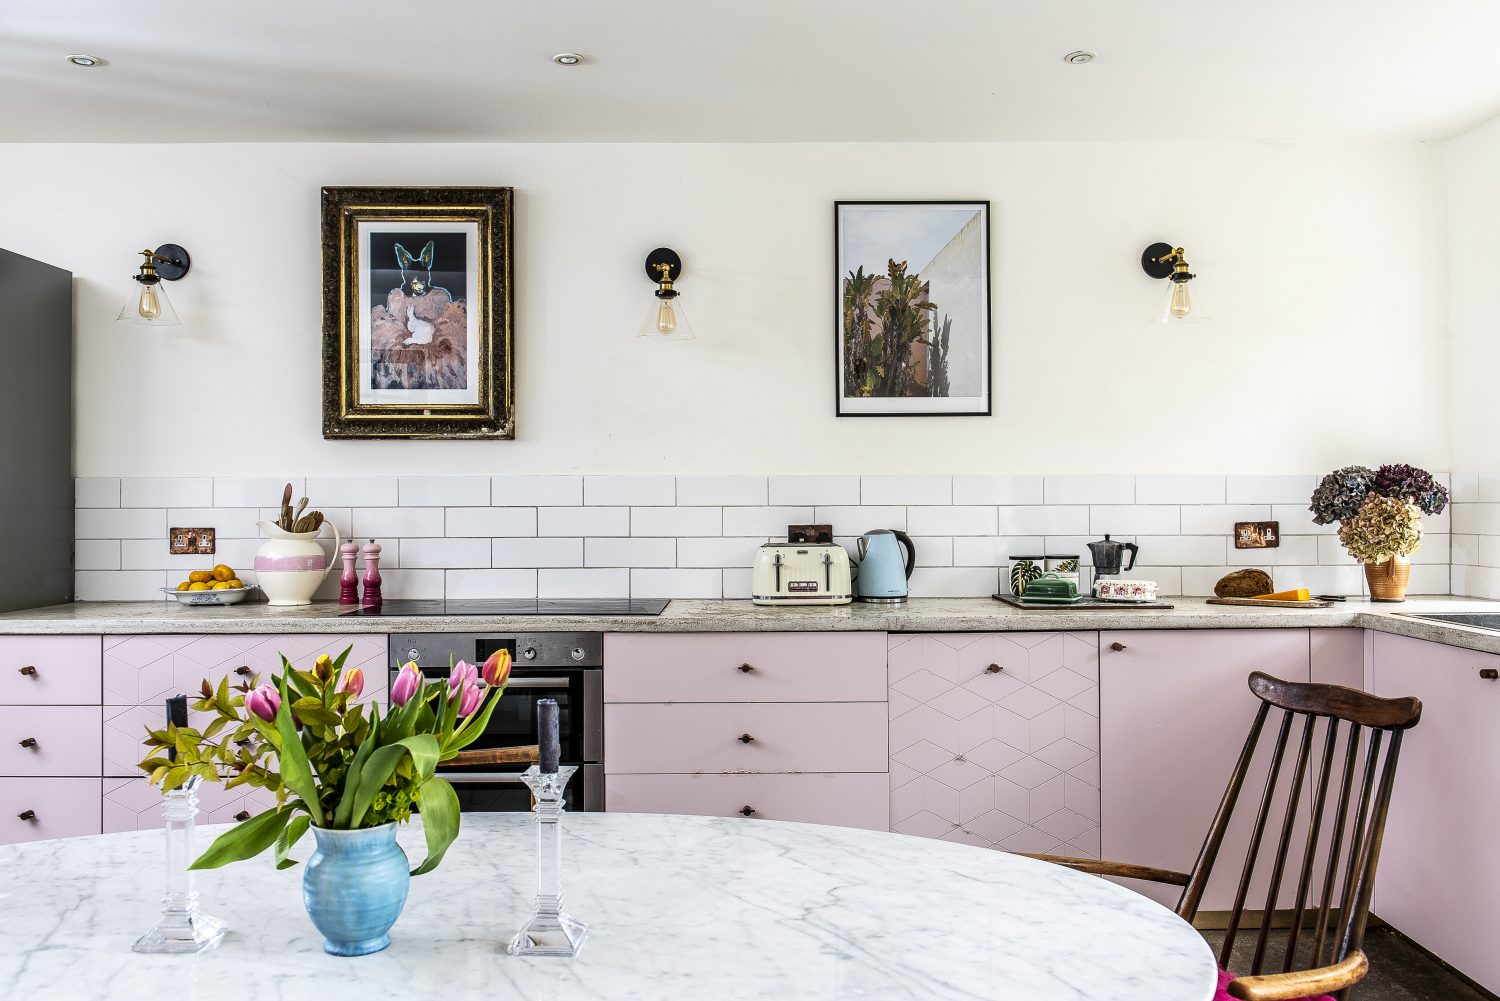 The working part of the kitchen is confined to one wall with cupboards painted a dusty pink, some with a geometric pattern in copper. The worktop is poured concrete and the wall lights are from eBay